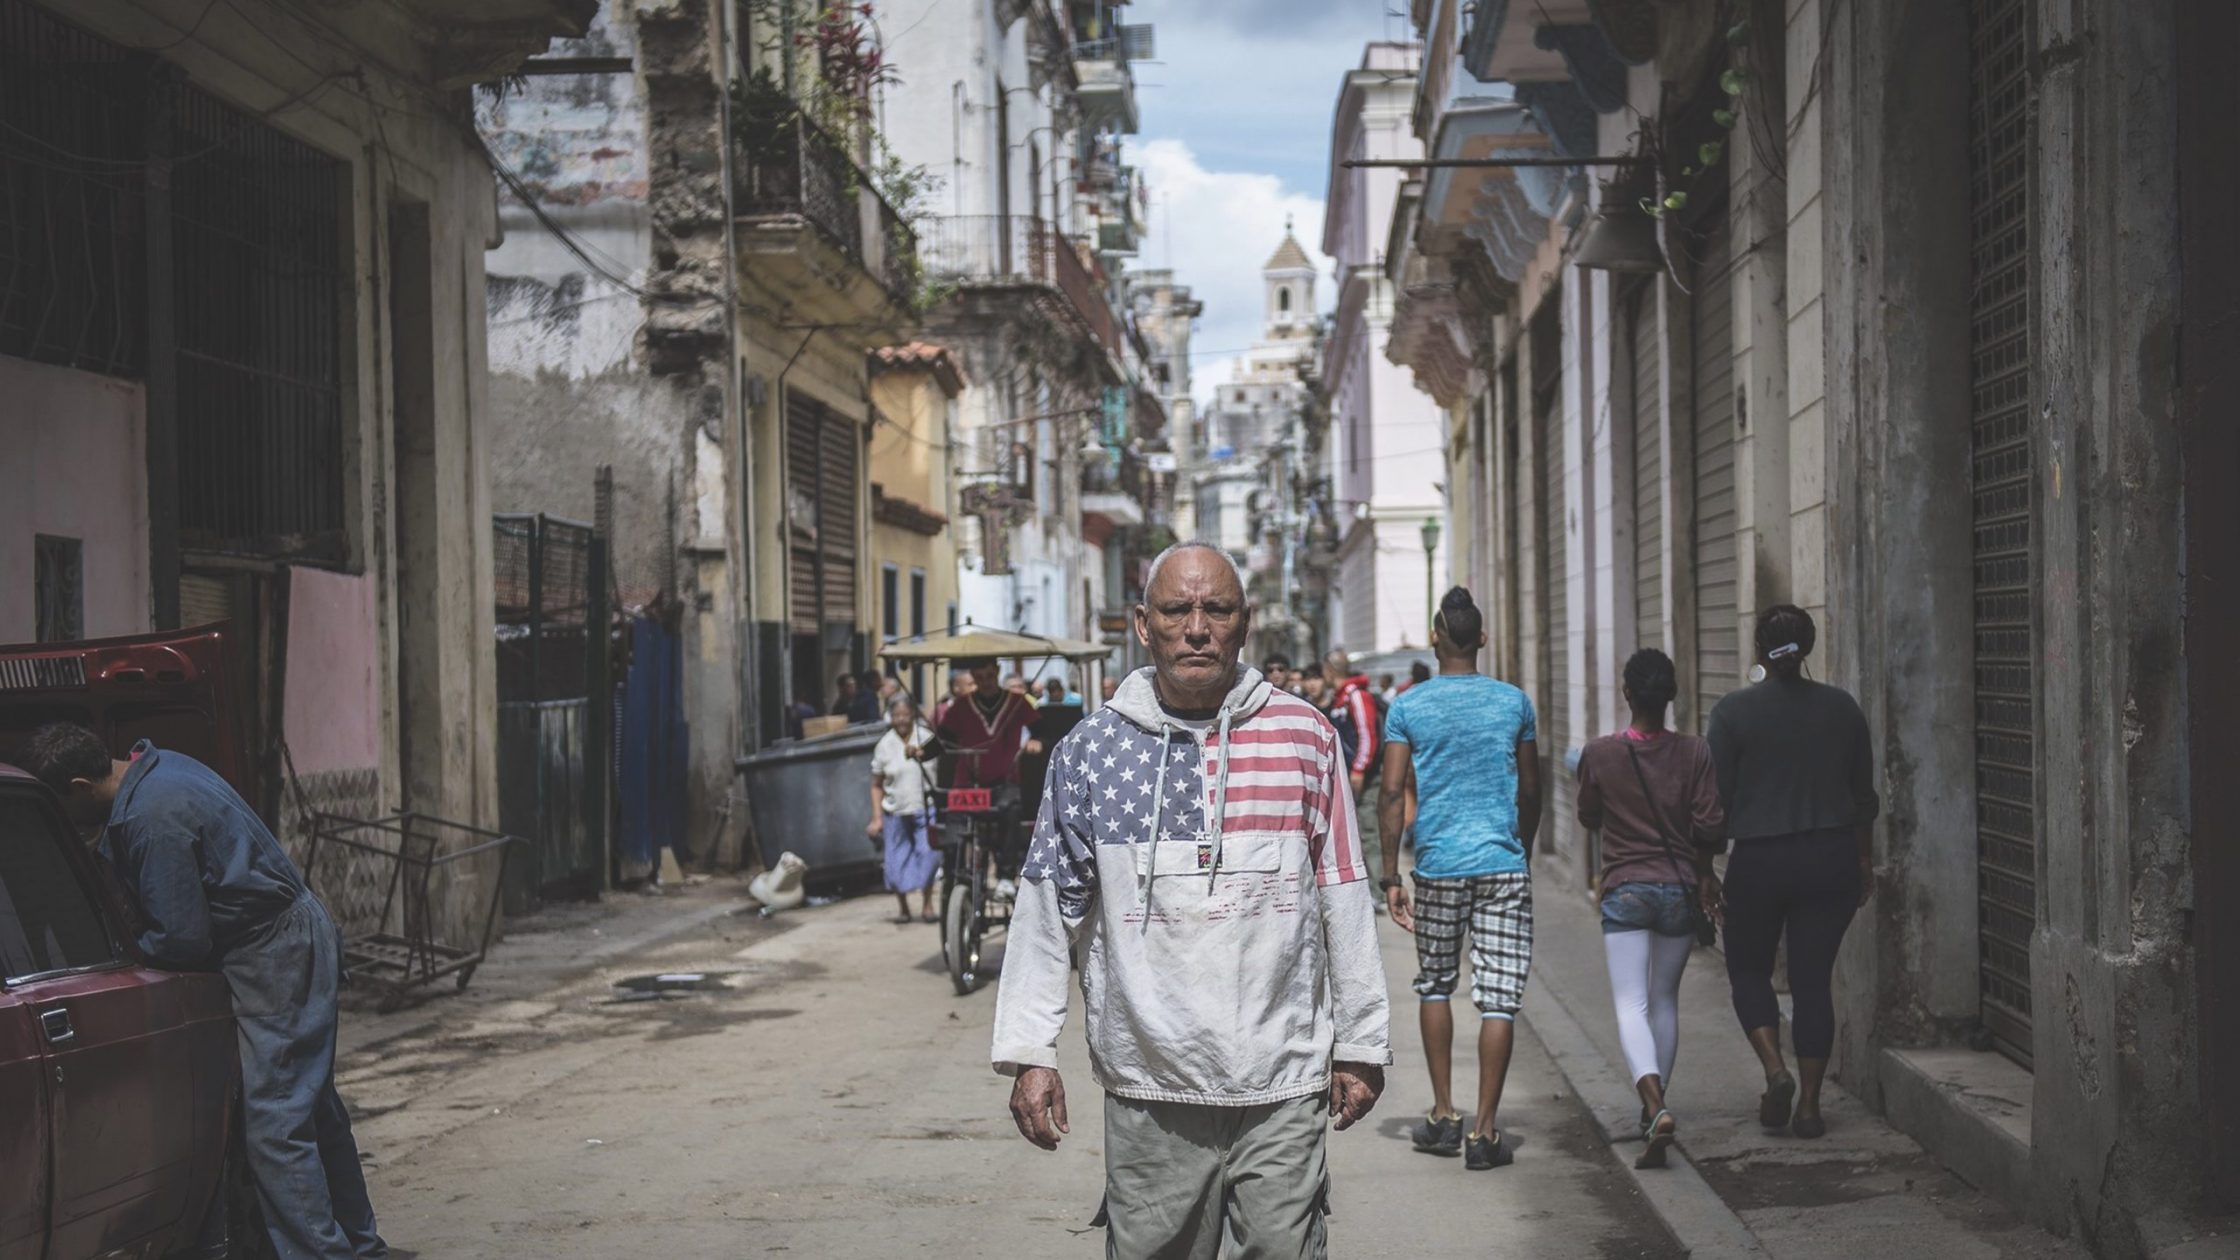 Man standing in Cuban street with US flag on shirt